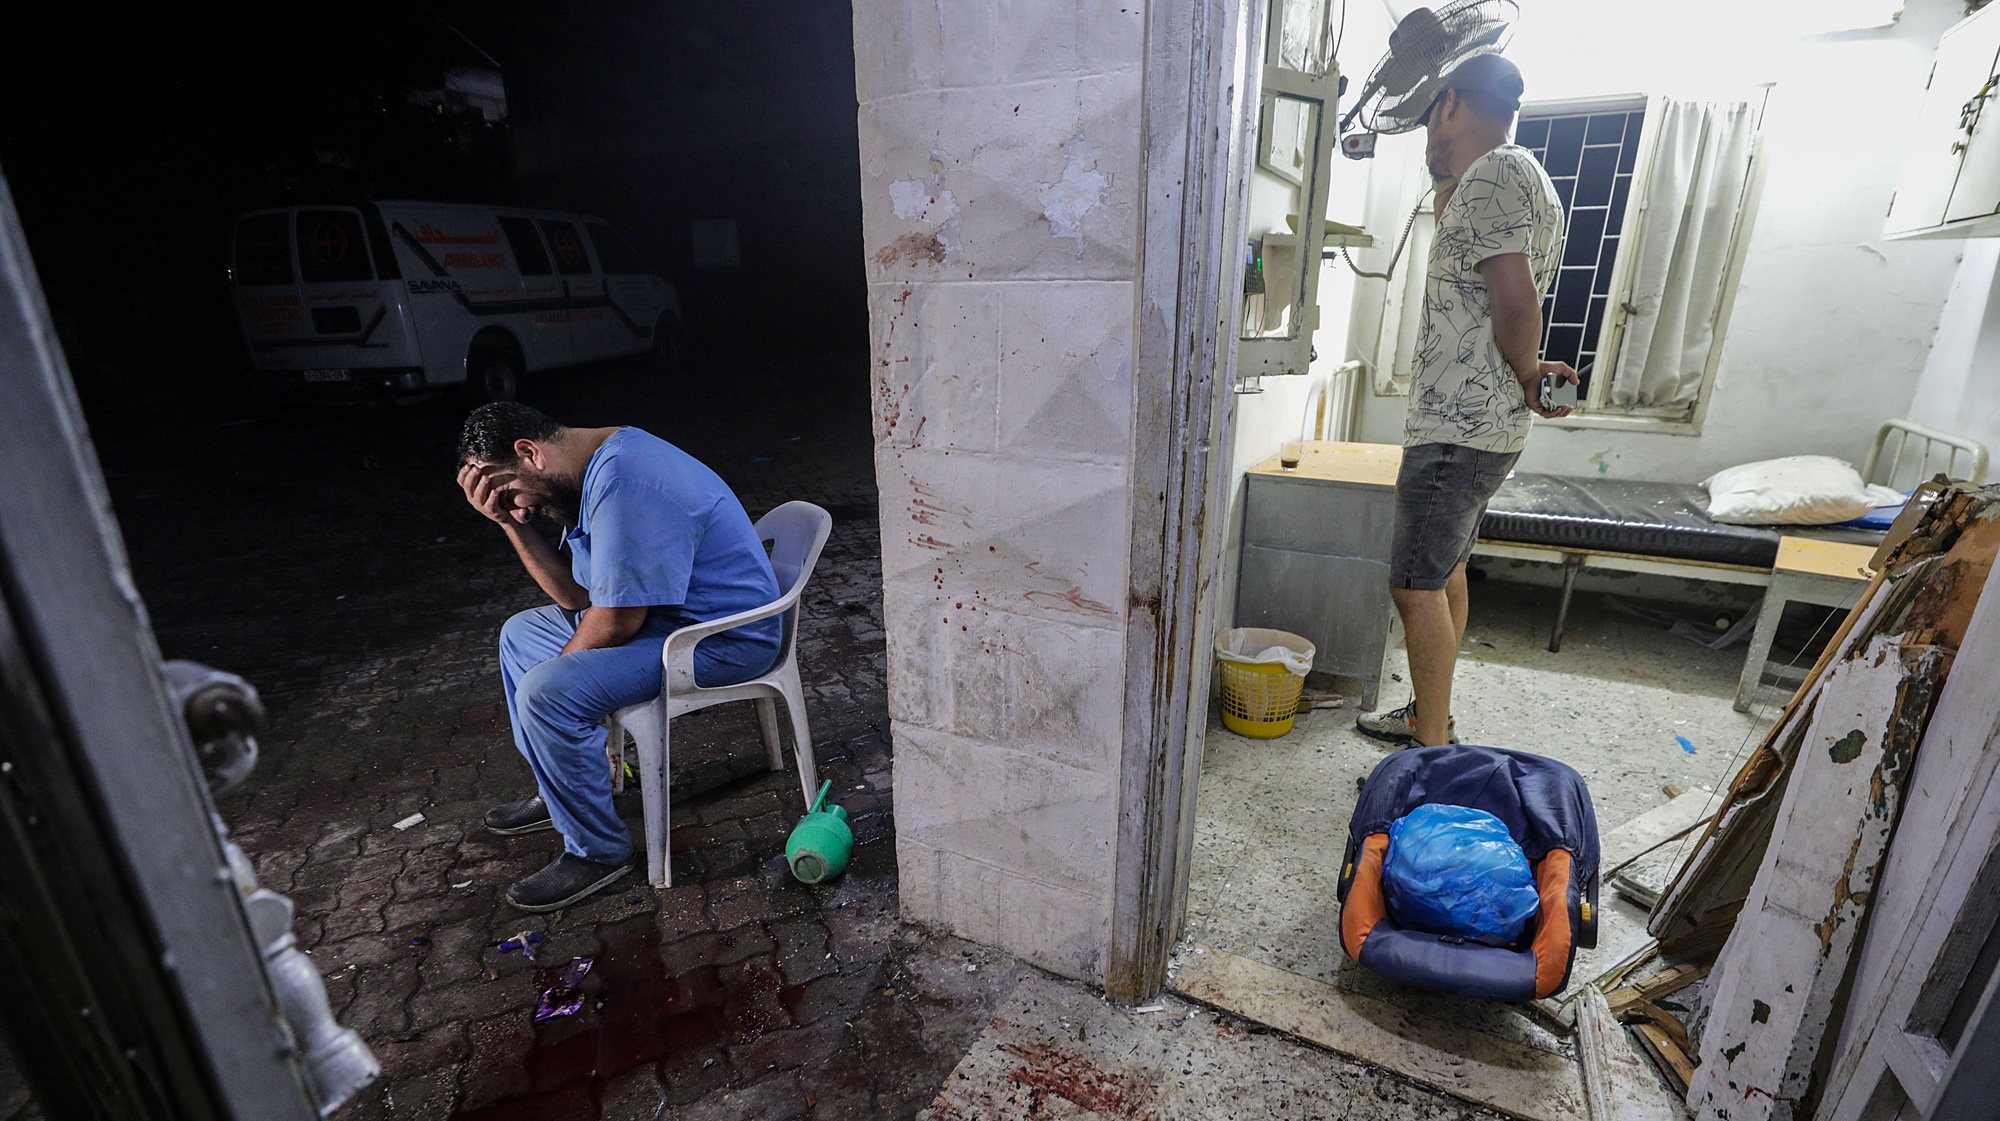 epa10962784 A doctor at the scene of Al Ahli hospital after an explosion in Gaza City, 17 October 2023.  (Issued 07 November 2023). 07 November 2023, marks one month since Hamas militants launched an attack against Israel from the Gaza Strip, which was followed by Israeli operations in Gaza and the West Bank. More than 10,000 Palestinians and at least 1,400 Israelis have been killed and more than 200 others were taken hostage by Hamas militants, according to the Palestinian health authority and  the Israel Defense Forces (IDF).  EPA/MOHAMMED SABER  ATTENTION: This Image is part of a PHOTO SET